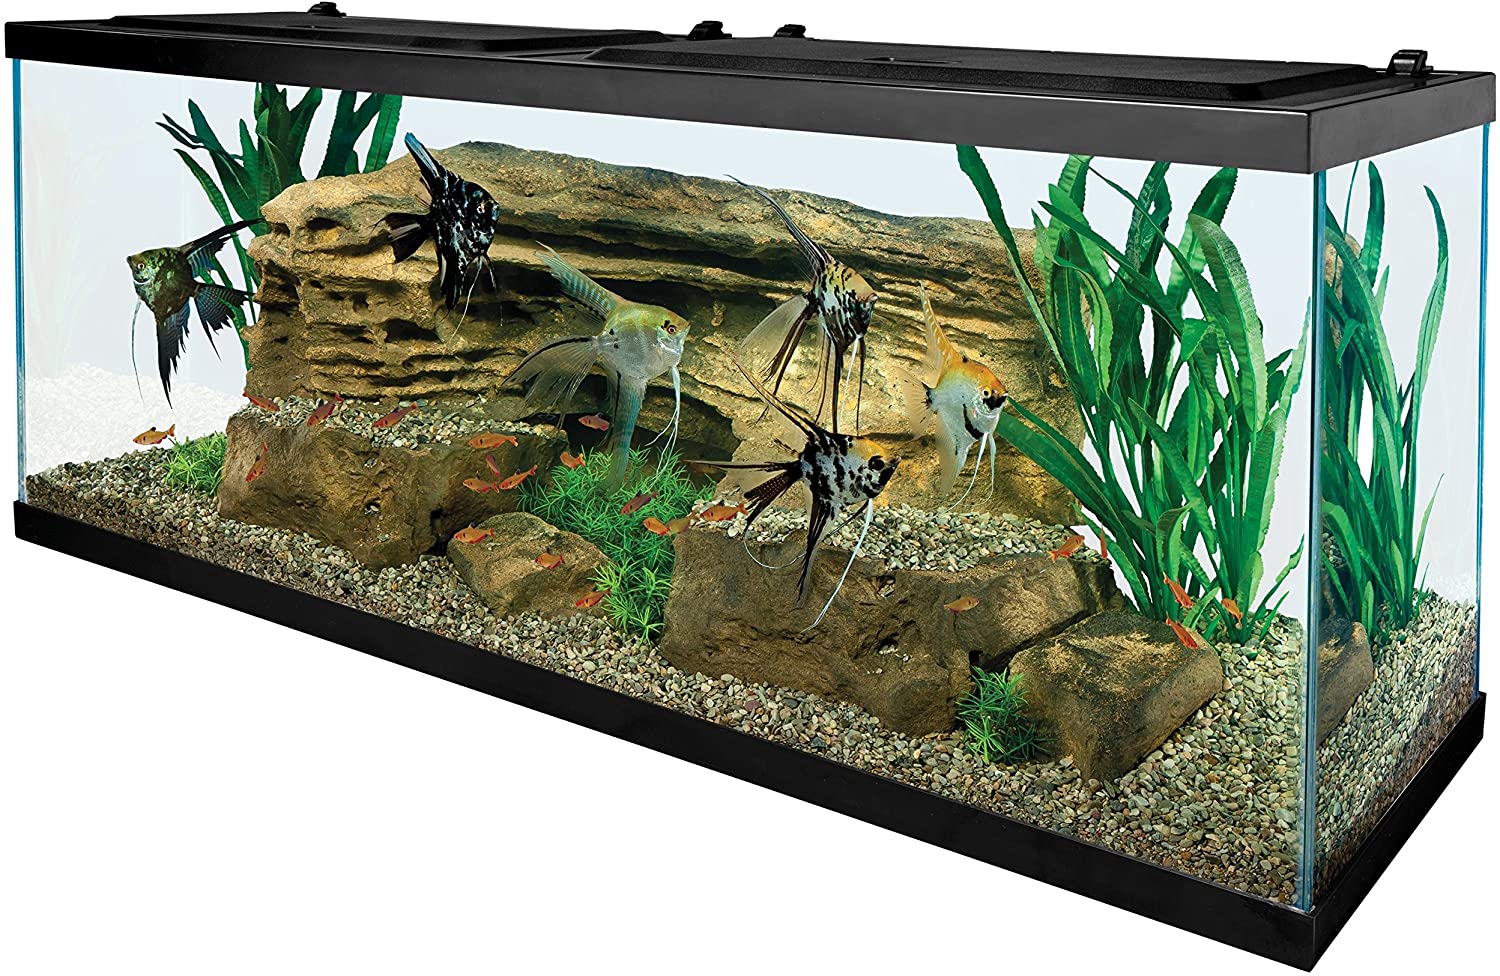 55 Gallon Fish Tanks - Options and Reviews 2022 | A Little Bit Fishy